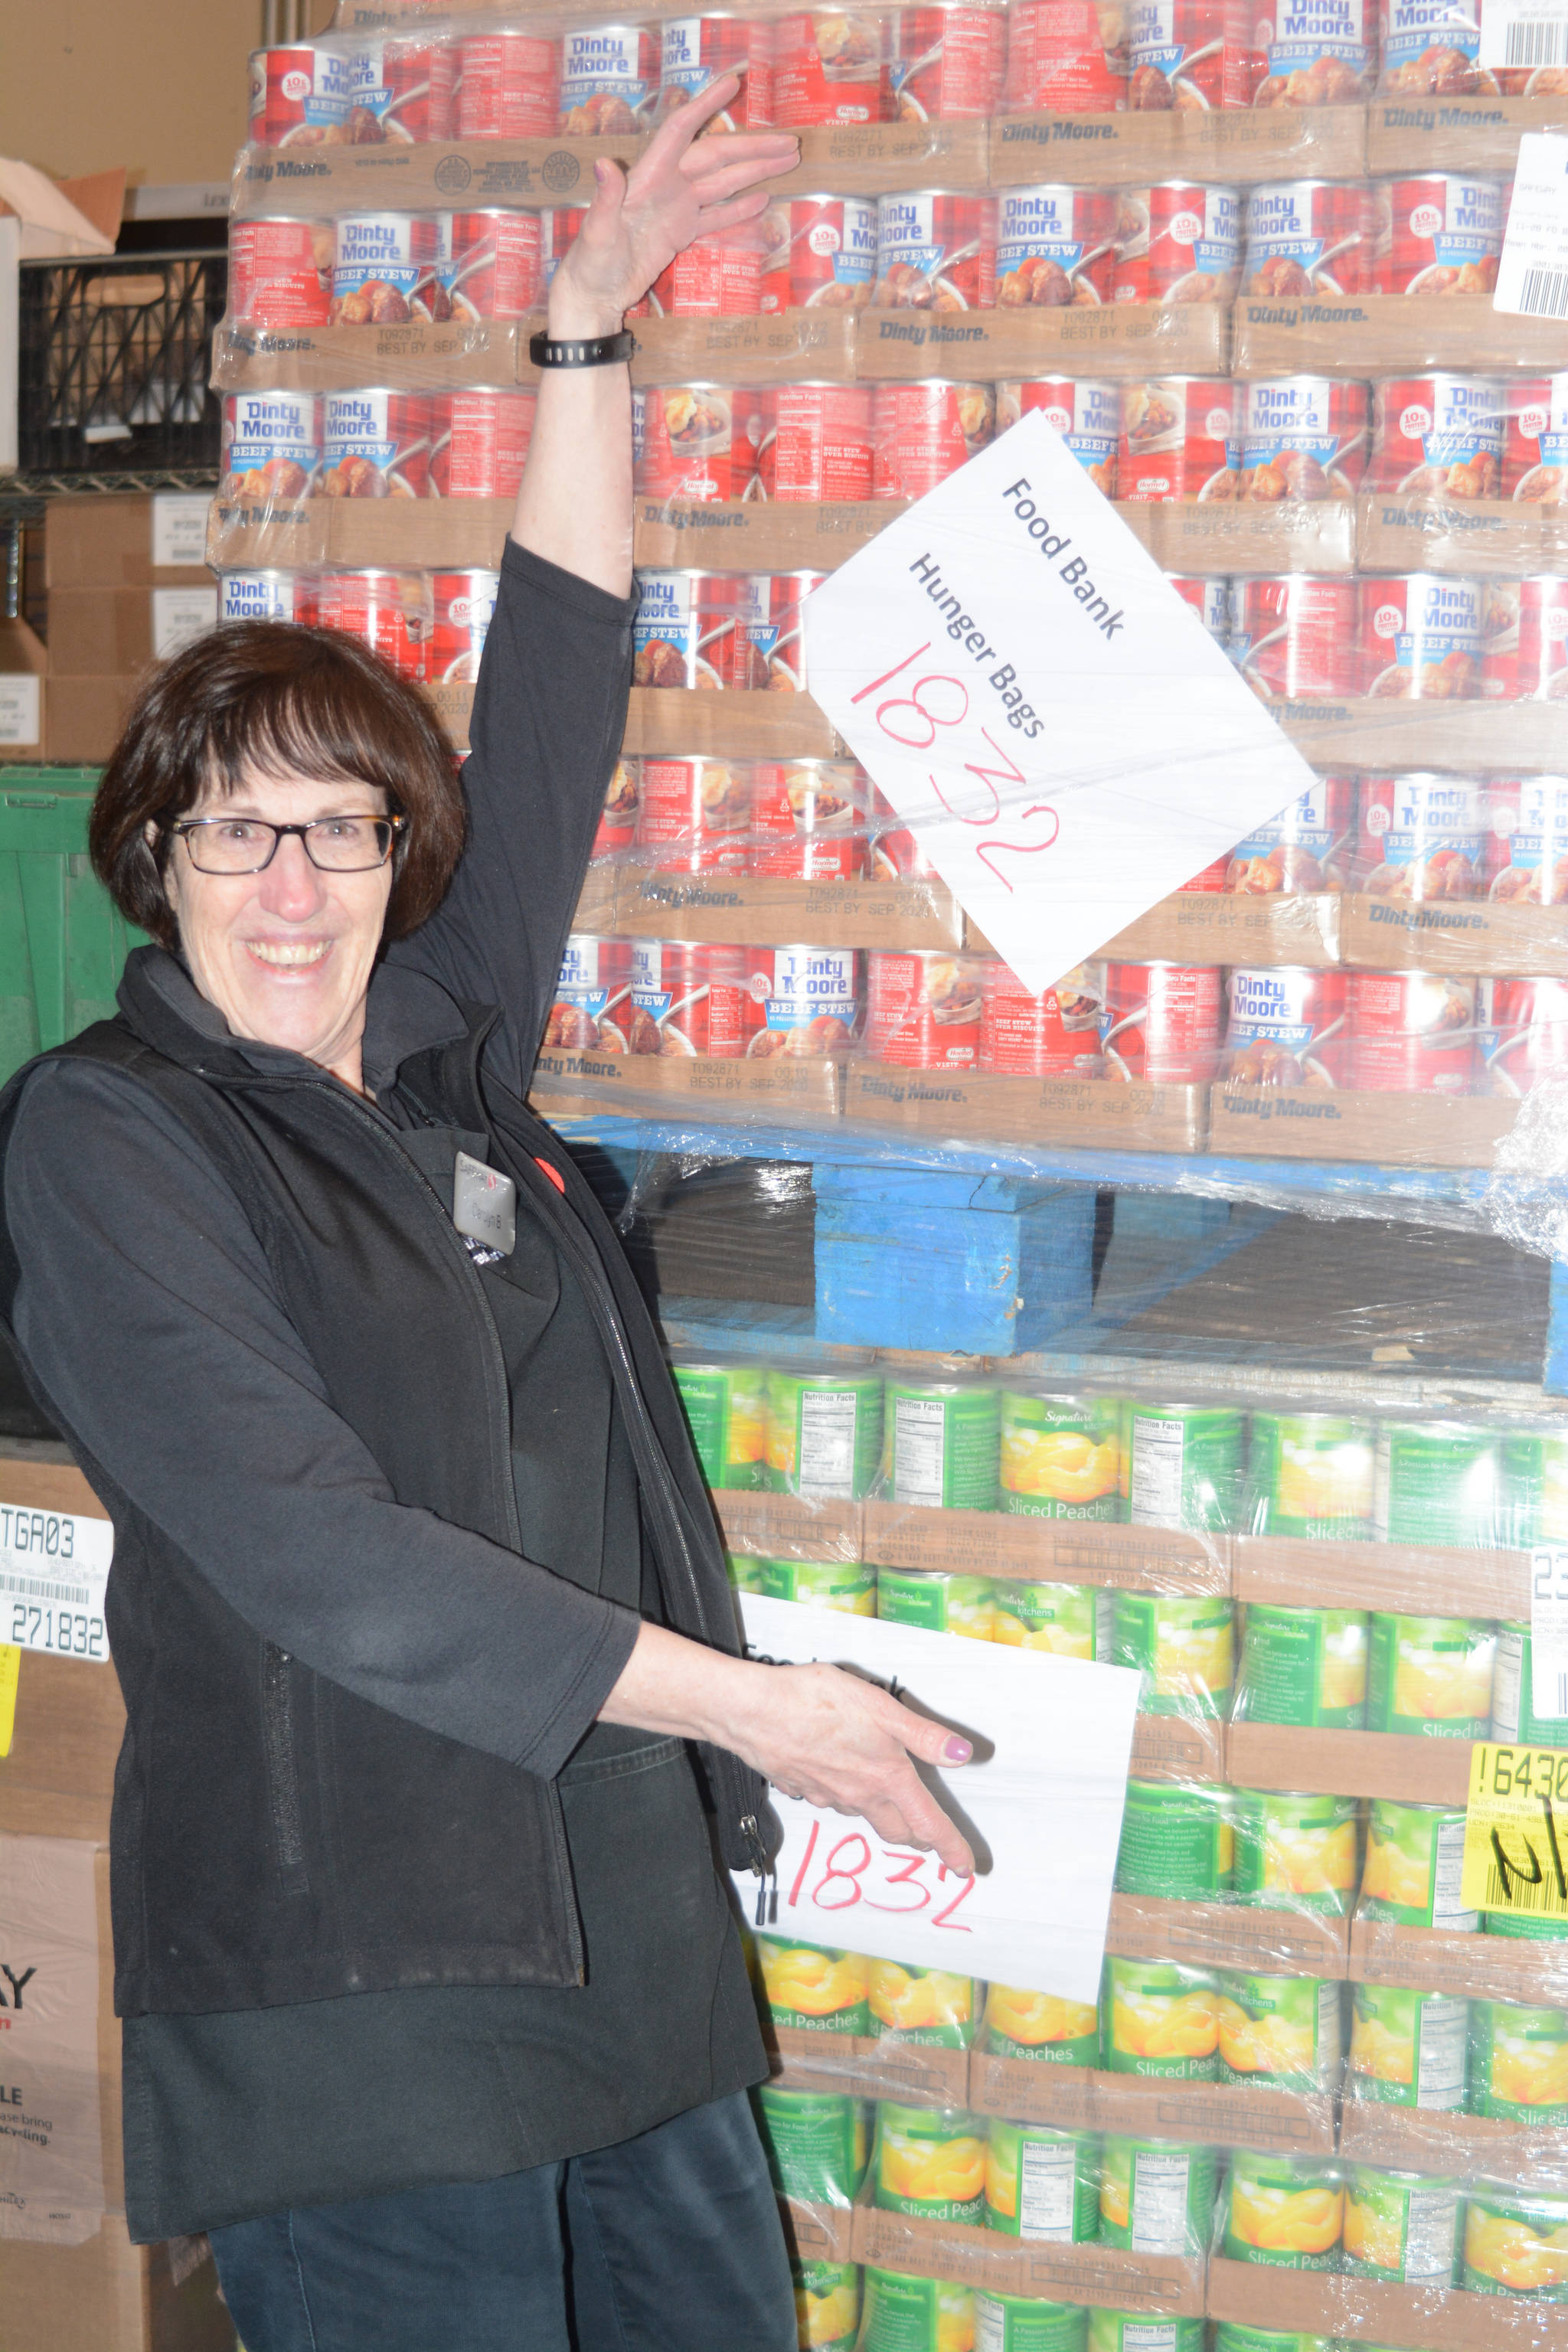 Homer Safeway checker Carolyn Bishop poses by a pallet of Hunger Bag food on Tuesday, Dec. 5, 2017. Bishop was one of the top checkers at the store who sold the Hunger Bags to customers as part of Safeway’s Hunger Bag project. Store Manager Bob Malone said about 1,300 bags at $10 each had been sold at the Homer store since Nov. 1. Through a national program, Safeway sells the bags and donates food to charities chosen by local stores. Pallets of food are organized at the Anchorage warehouse and sent to Homer. This year’s Homer Hunger Bags went to the Homer Community Food Pantry. Crew from the U.S. Coast Guard Cutter Naushon helped deliver food from Safeway to the food pantry. “This year, from what I understand, the need is more than normal,” Malone said. (Photo by Michael Armstrong, Homer News)